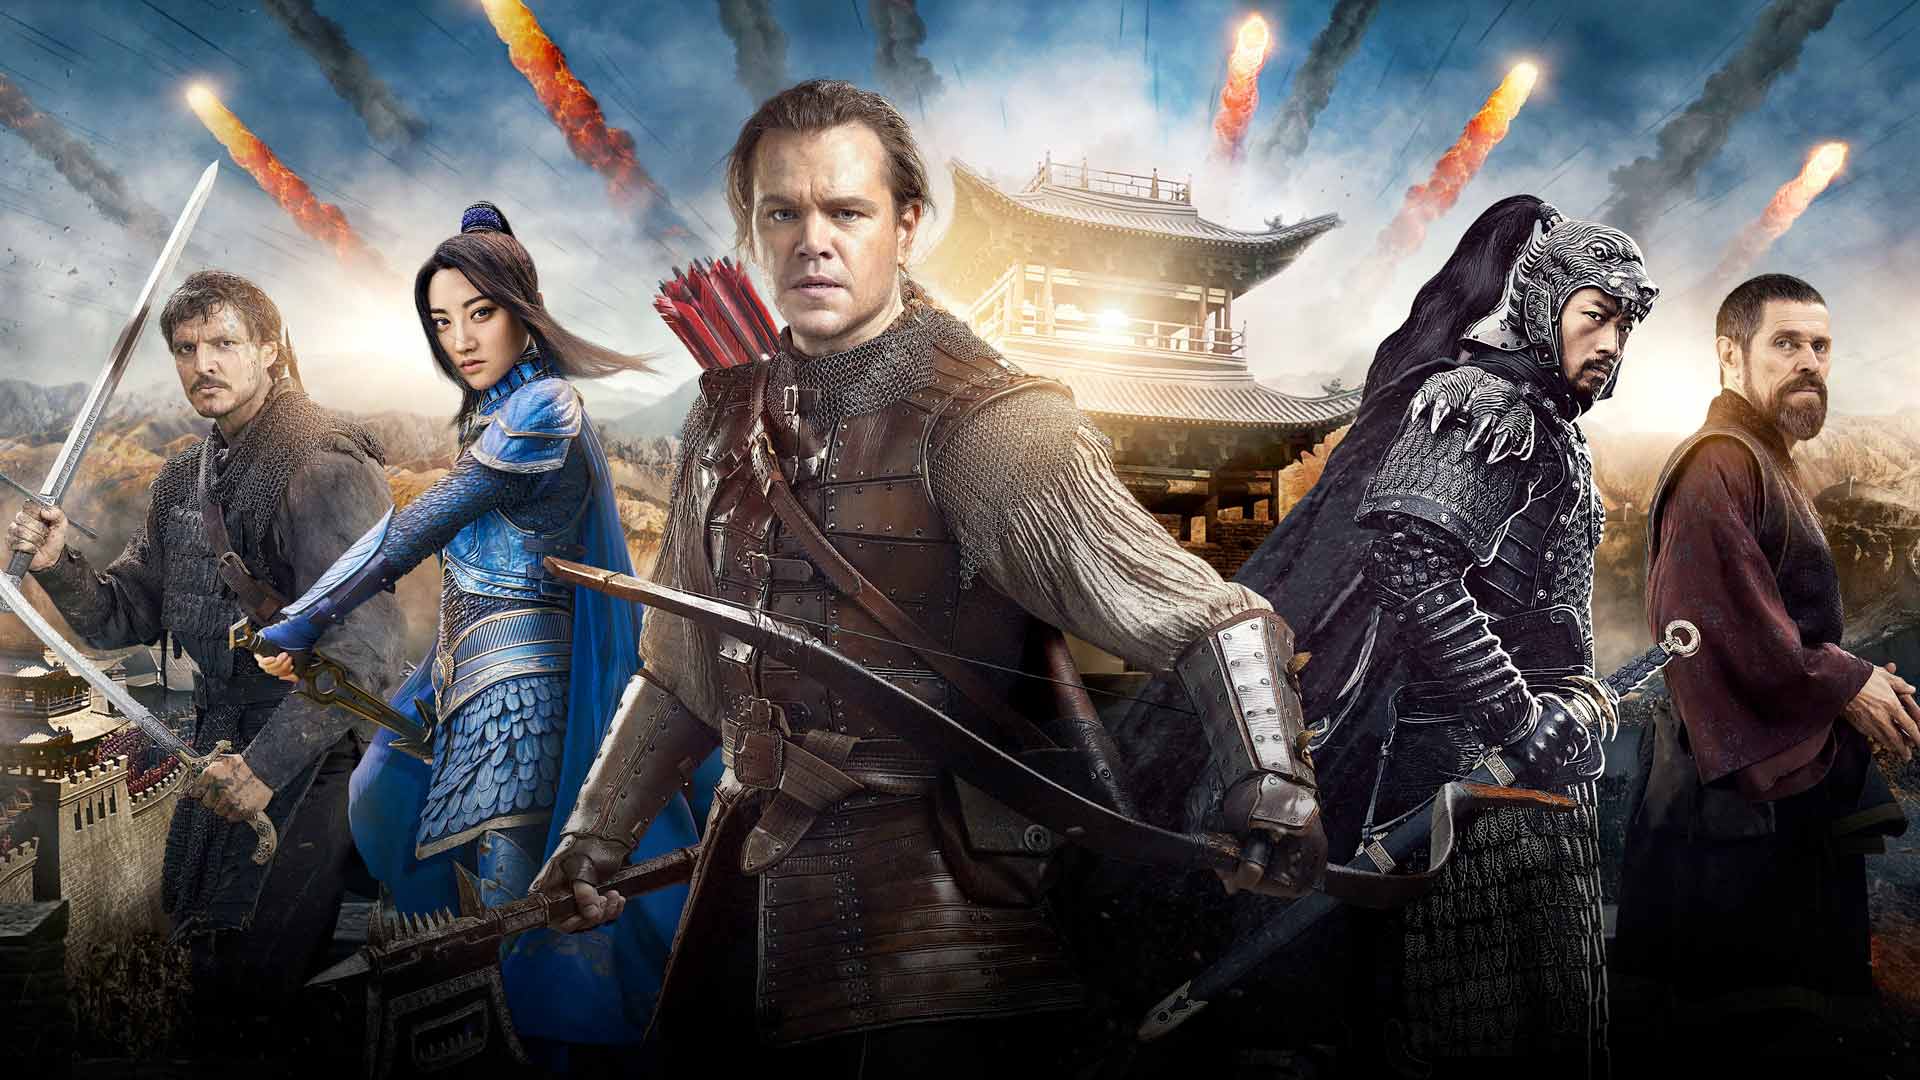 ‘The Great Wall’ is more fascinating for what it is than what it shows